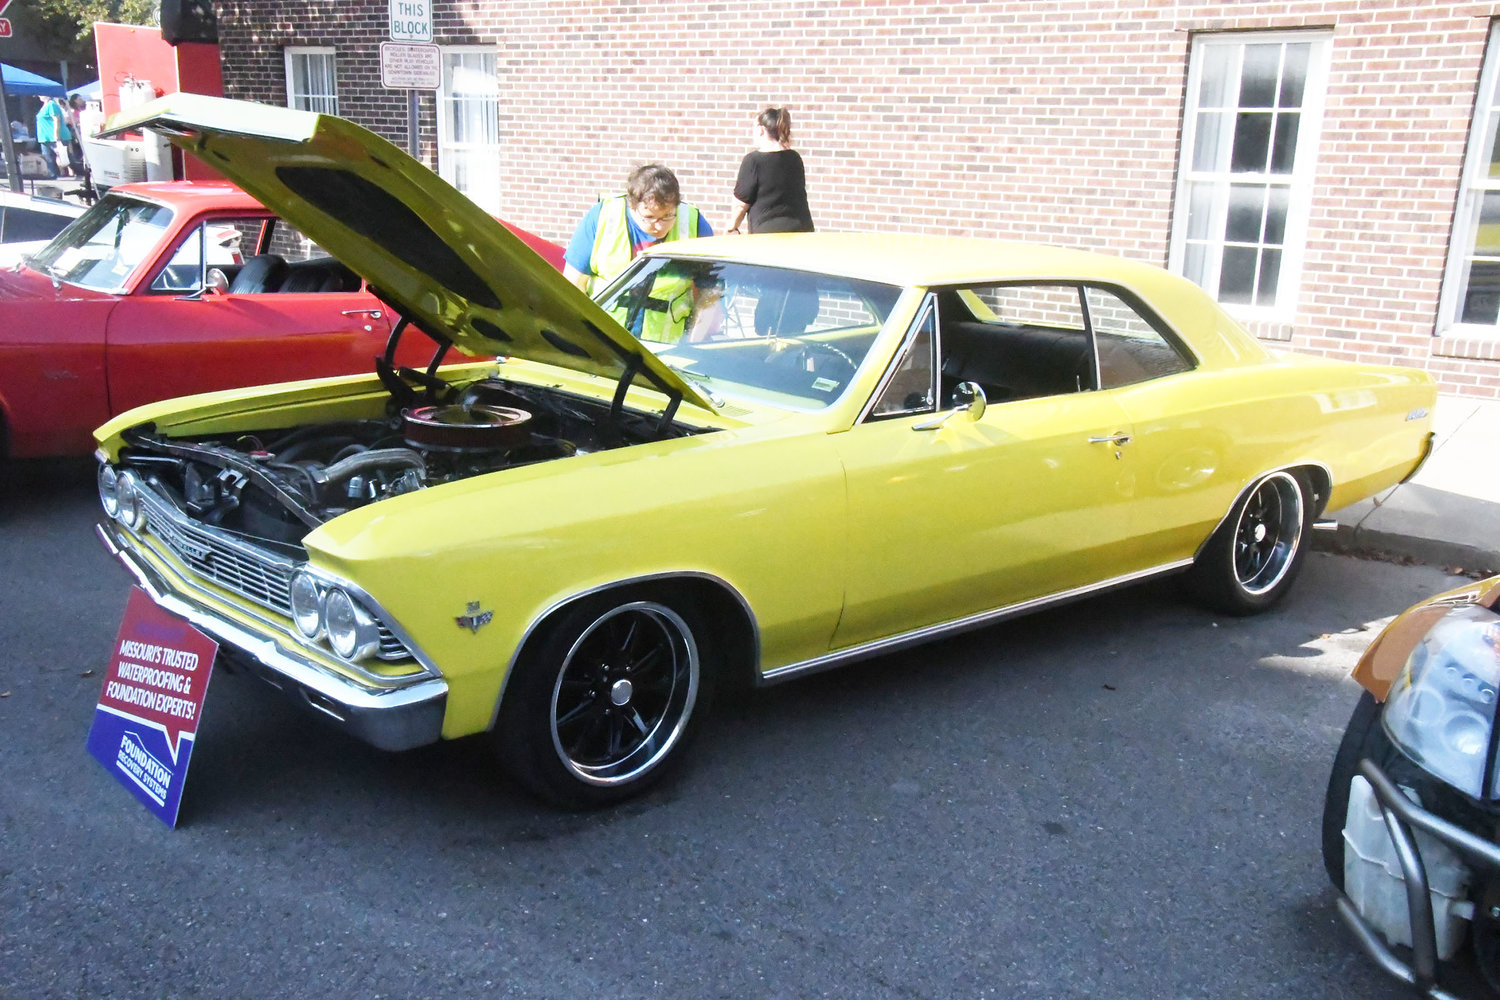 Ryan Lucas' 1966 yellow Chevelle was tops in its division and was second place in the running for People's Choice.